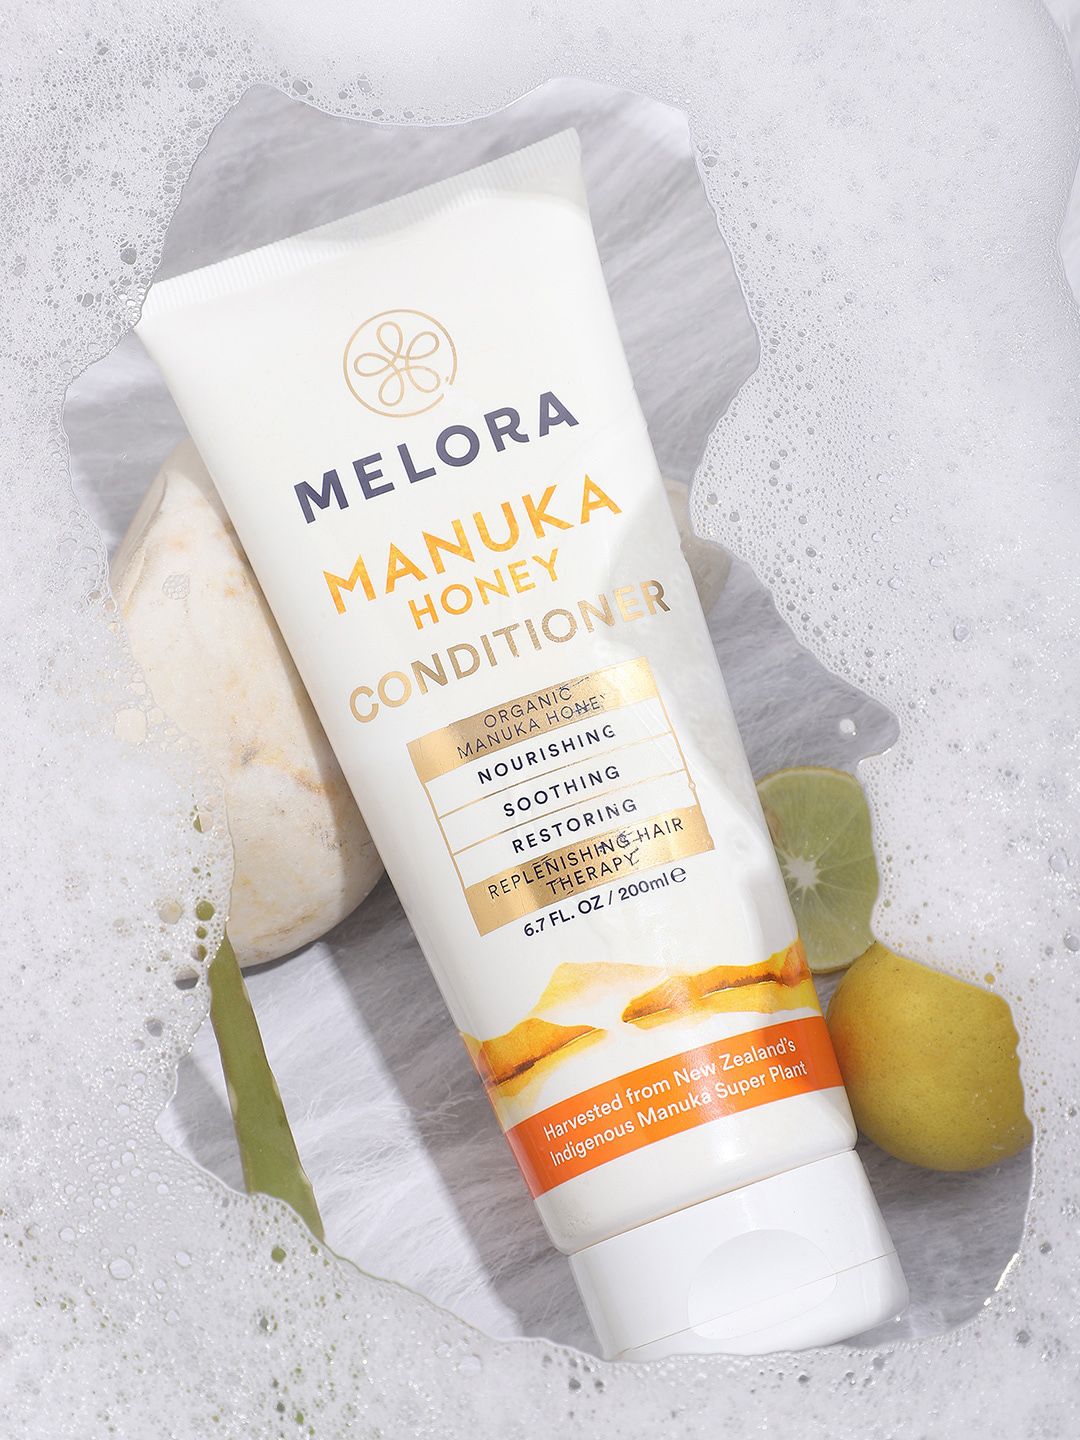 MELORA Manuka Honey Hair Conditioner - Replenishing Hair Therapy - 200ml Price in India